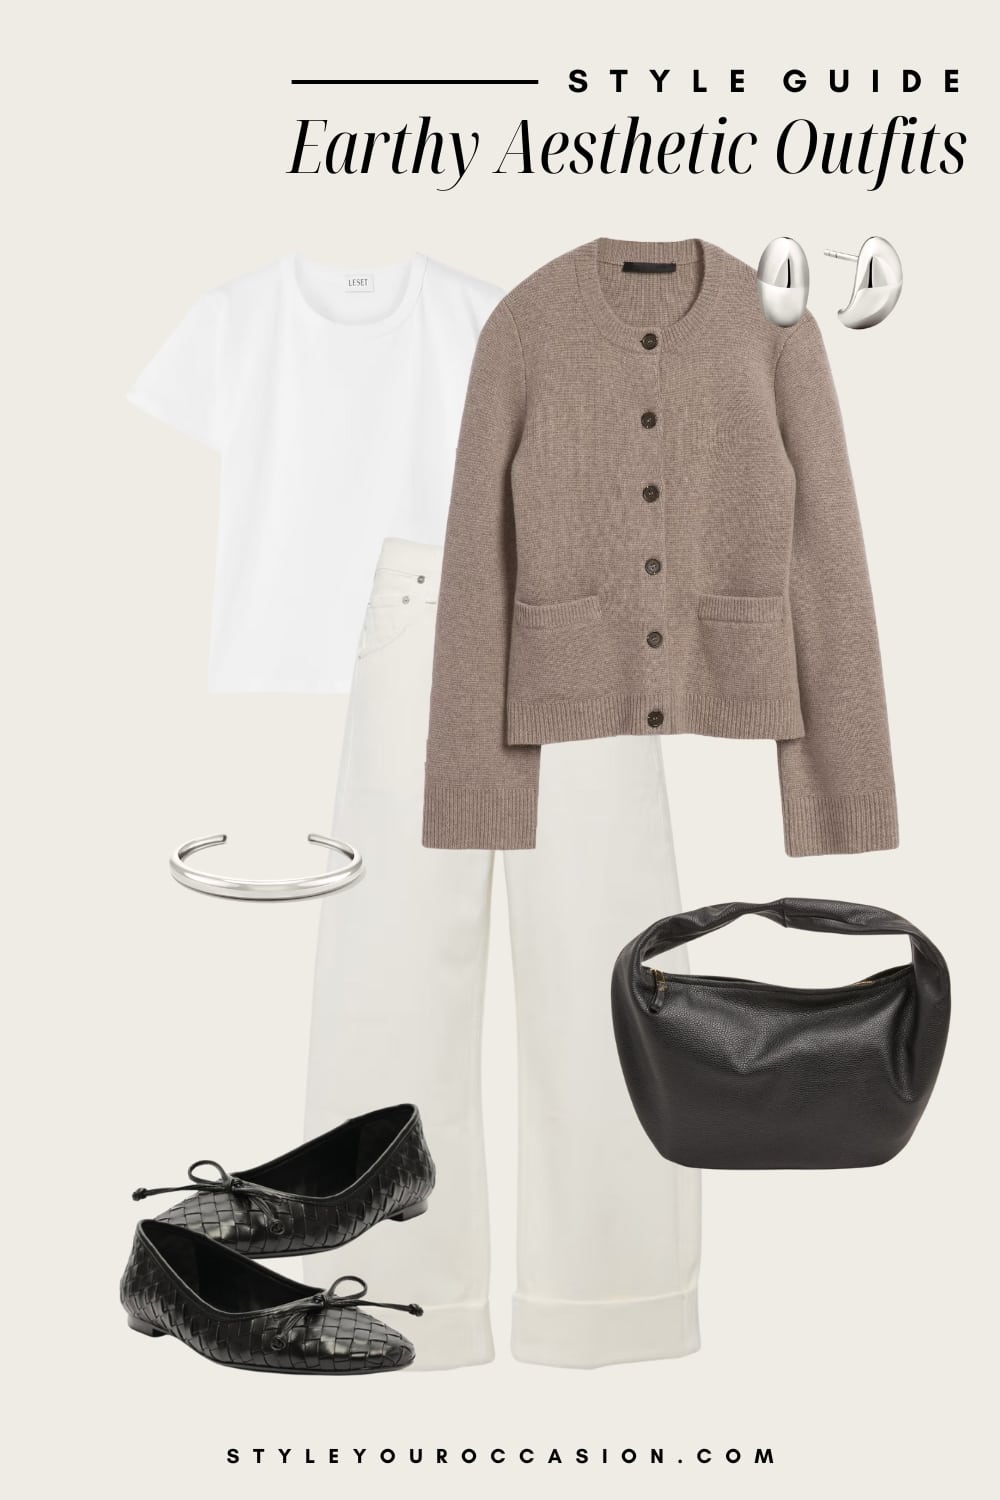 Flat lay outfit graphic of white jeans, a white t-shirt, a brown cardigan and dark brown accessories.